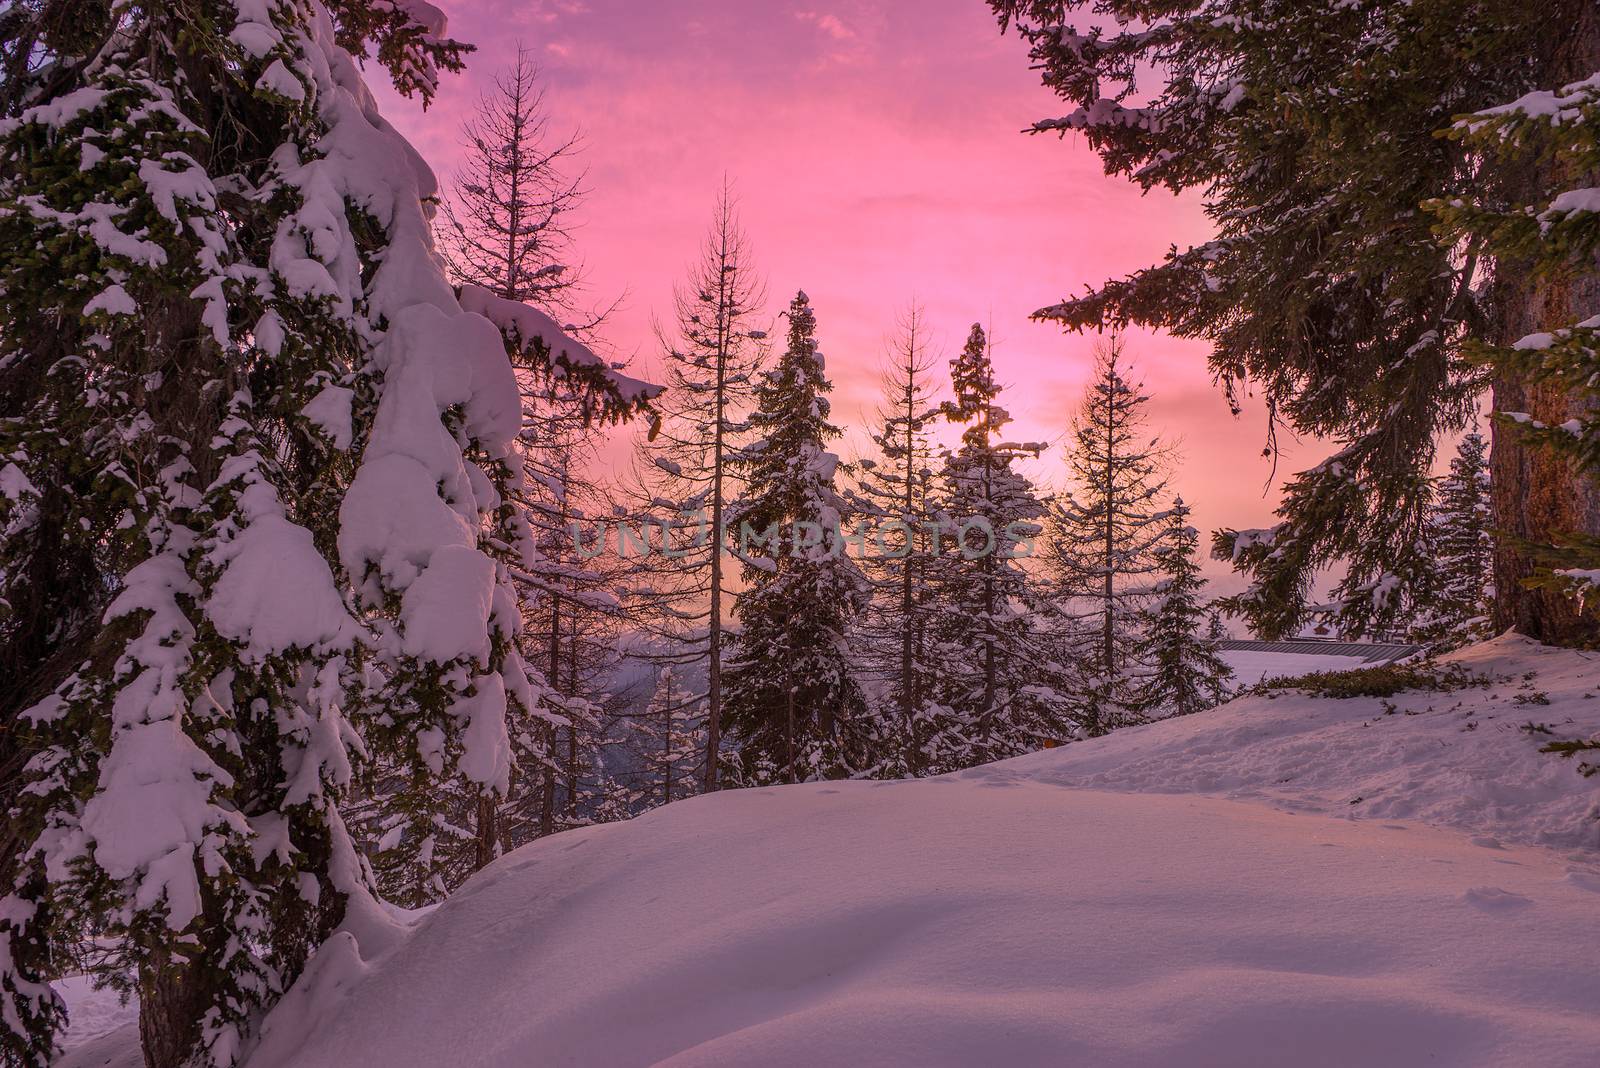 Snow trees during sunset in a ski resort area in Lapland.
